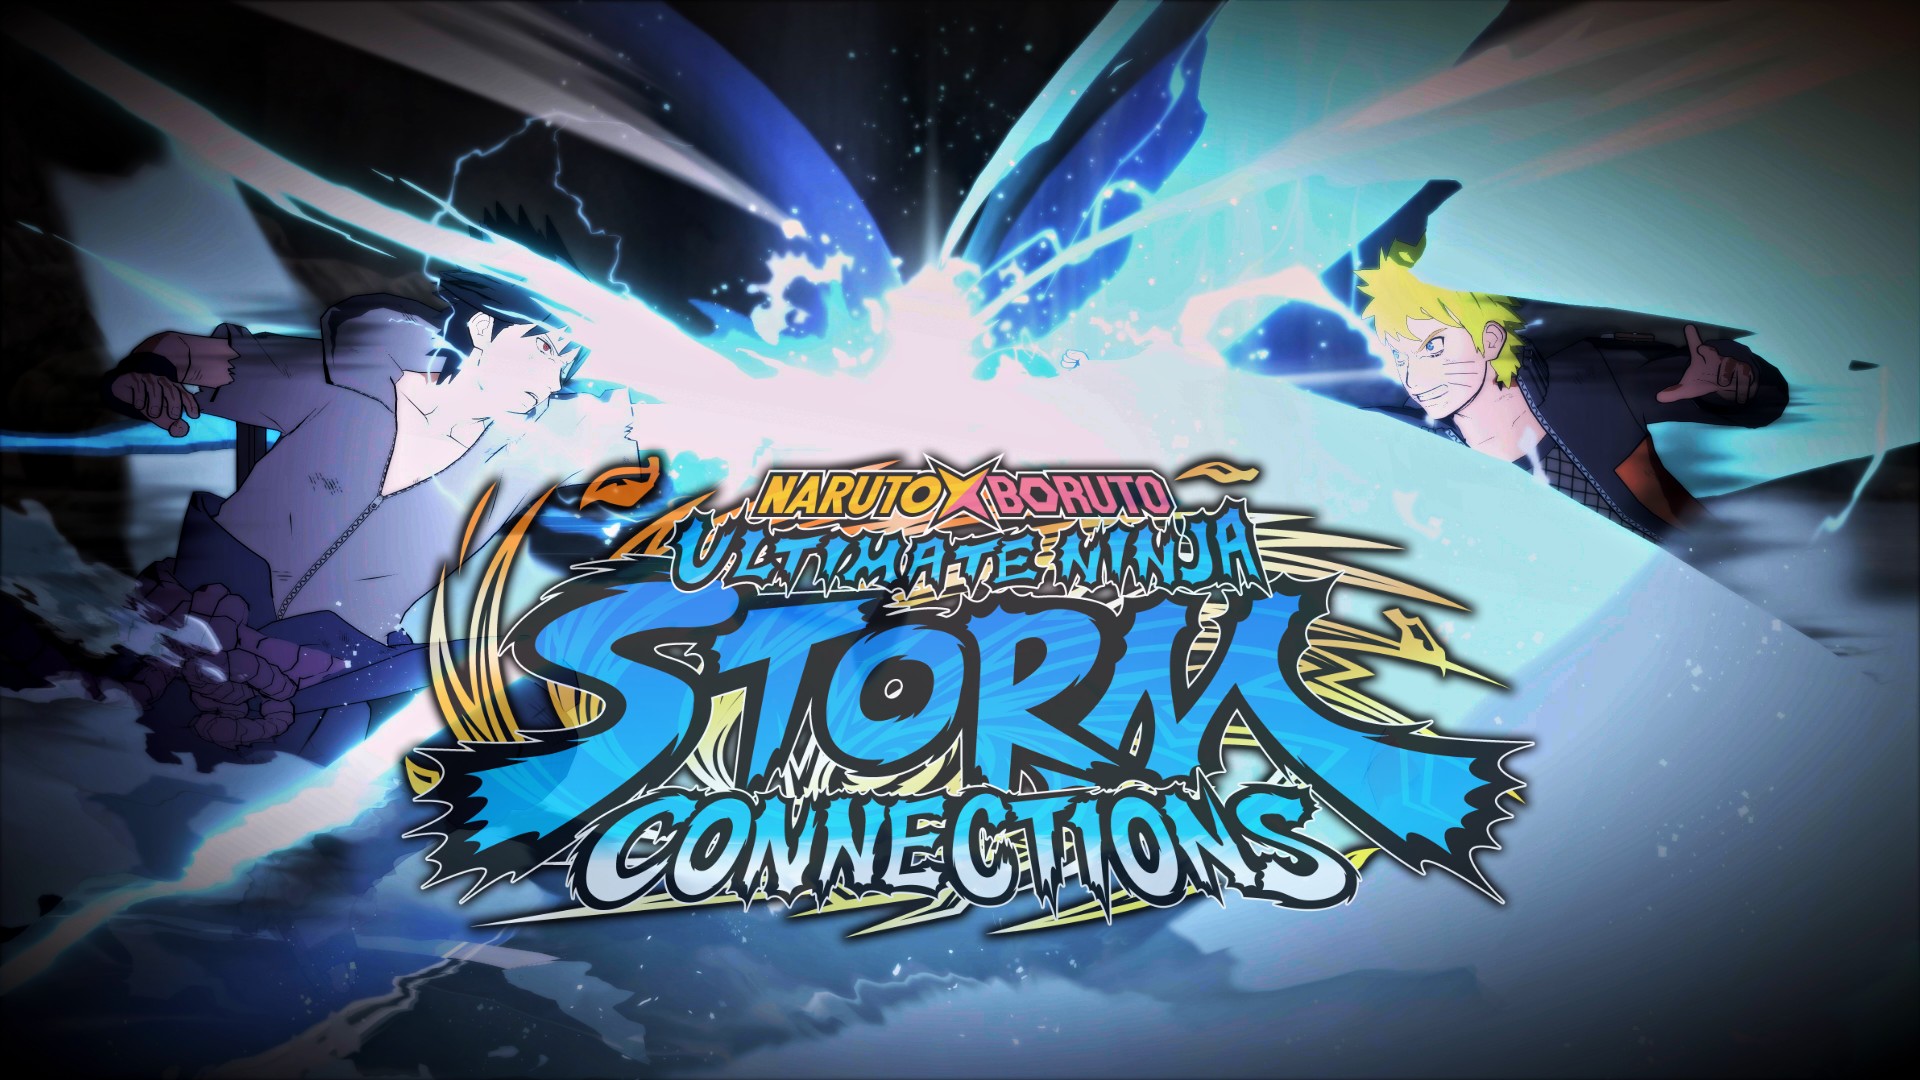 Get a glimpse of the exclusive original story created for NARUTO X BORUTO  Ultimate Ninja STORM CONNECTIONS